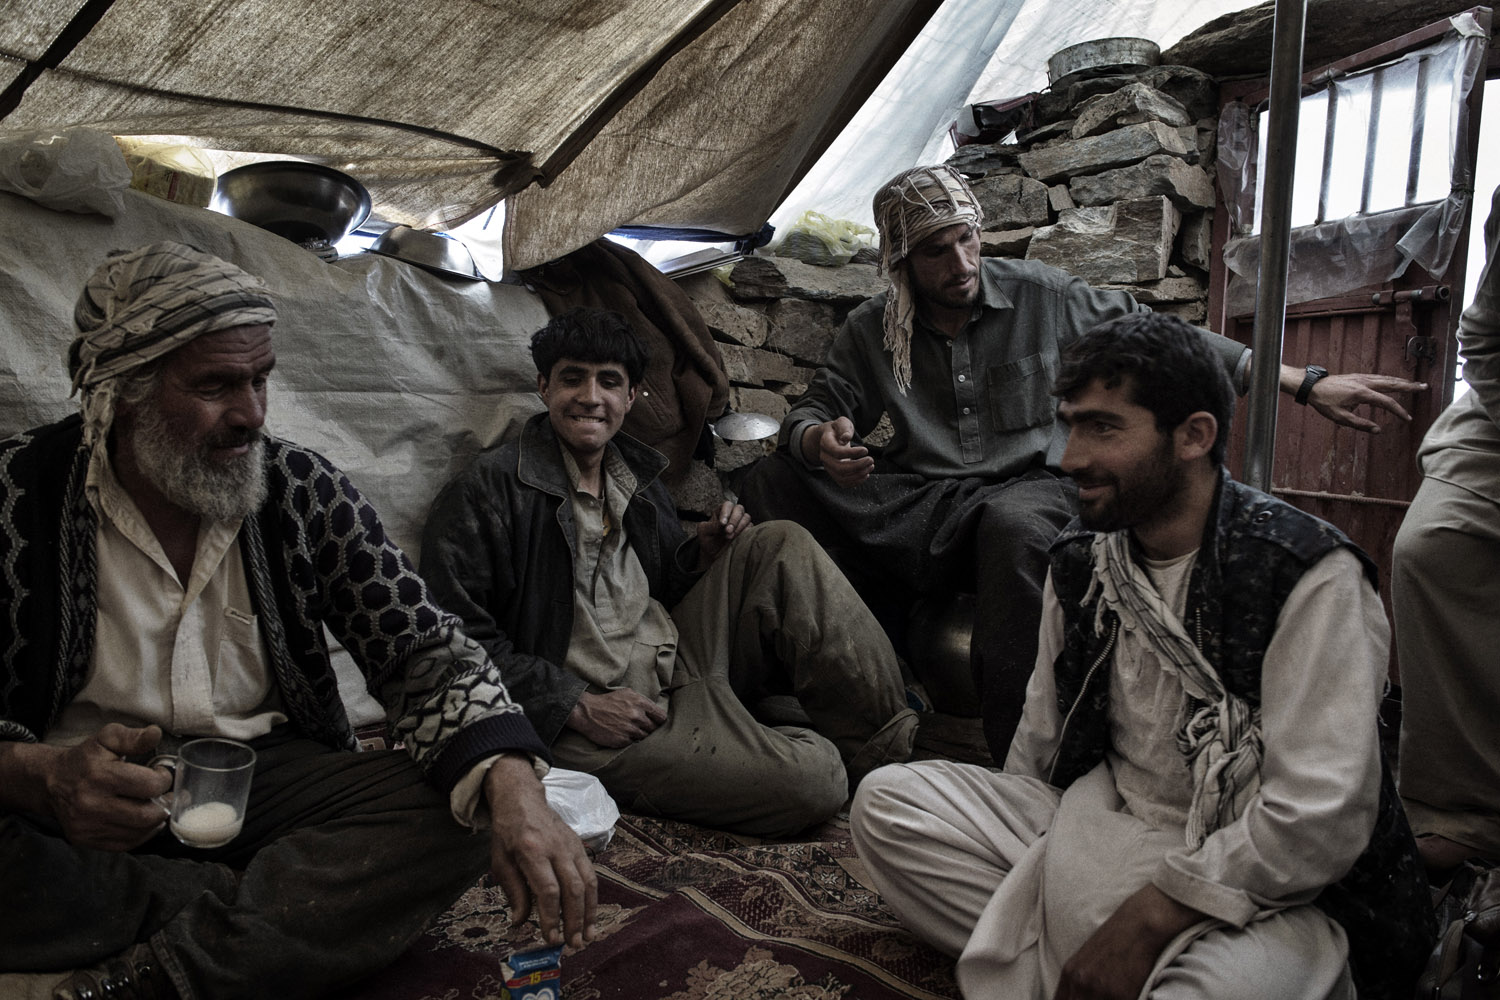 Panjshir Valley in north-central Afghanistan May 2013:A group of emerald miners take a tea break in their makeshift tent at the top of the mountain in Panjshir. Rumors of men who have made millions overnight keep the miners going.